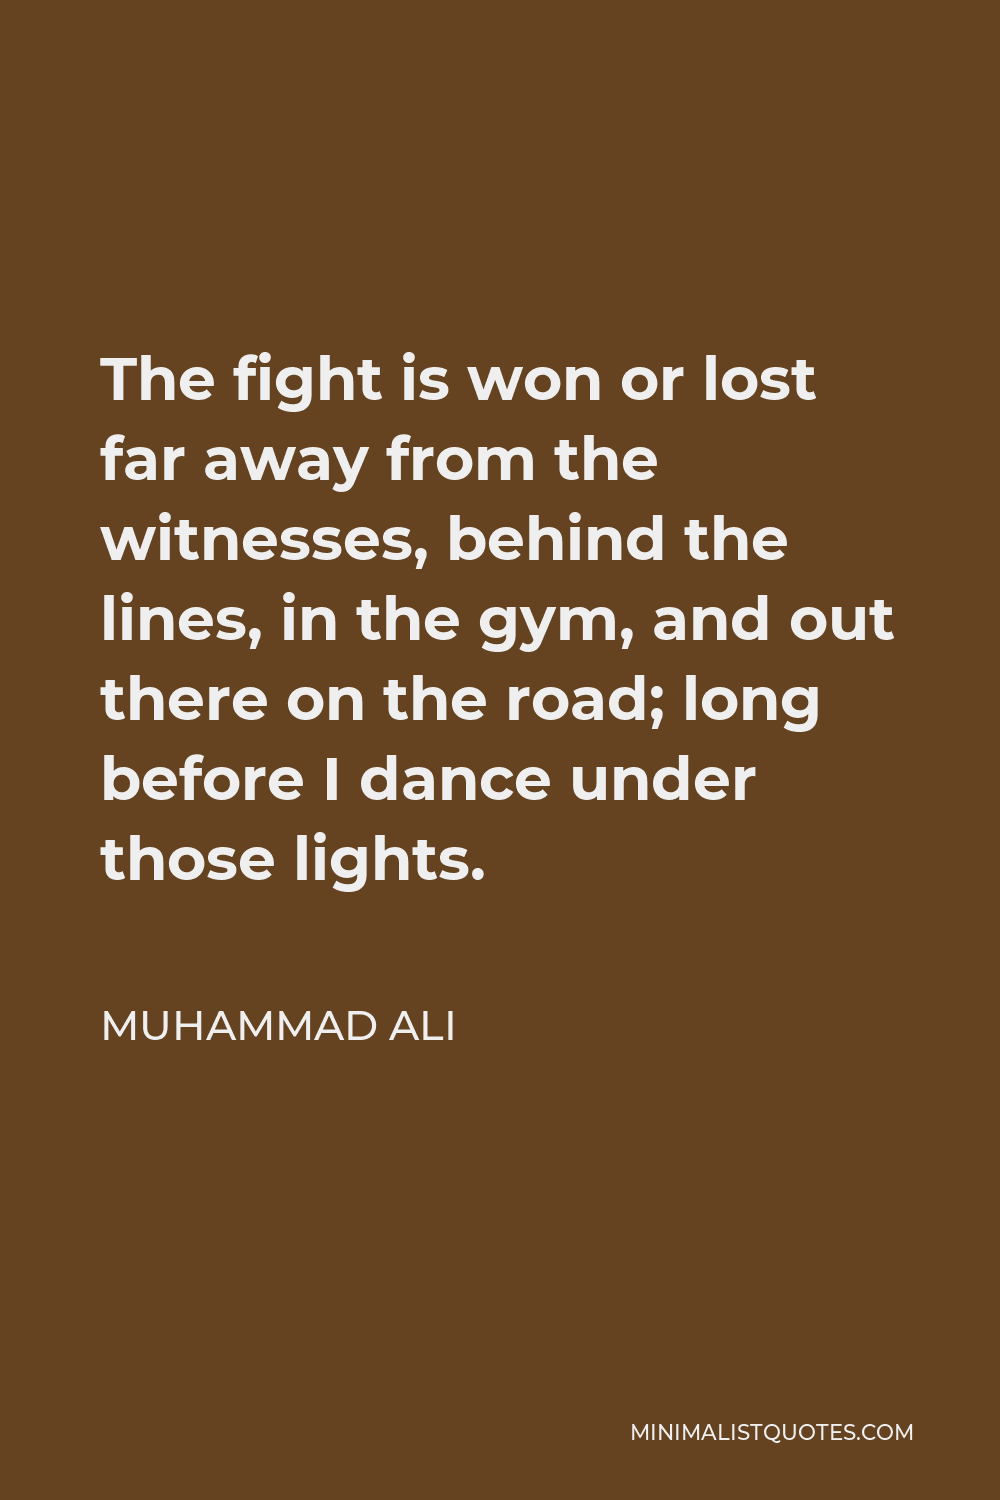 Muhammad Ali Quote - The fight is won or lost far away from the witnesses, behind the lines, in the gym, and out there on the road; long before I dance under those lights.